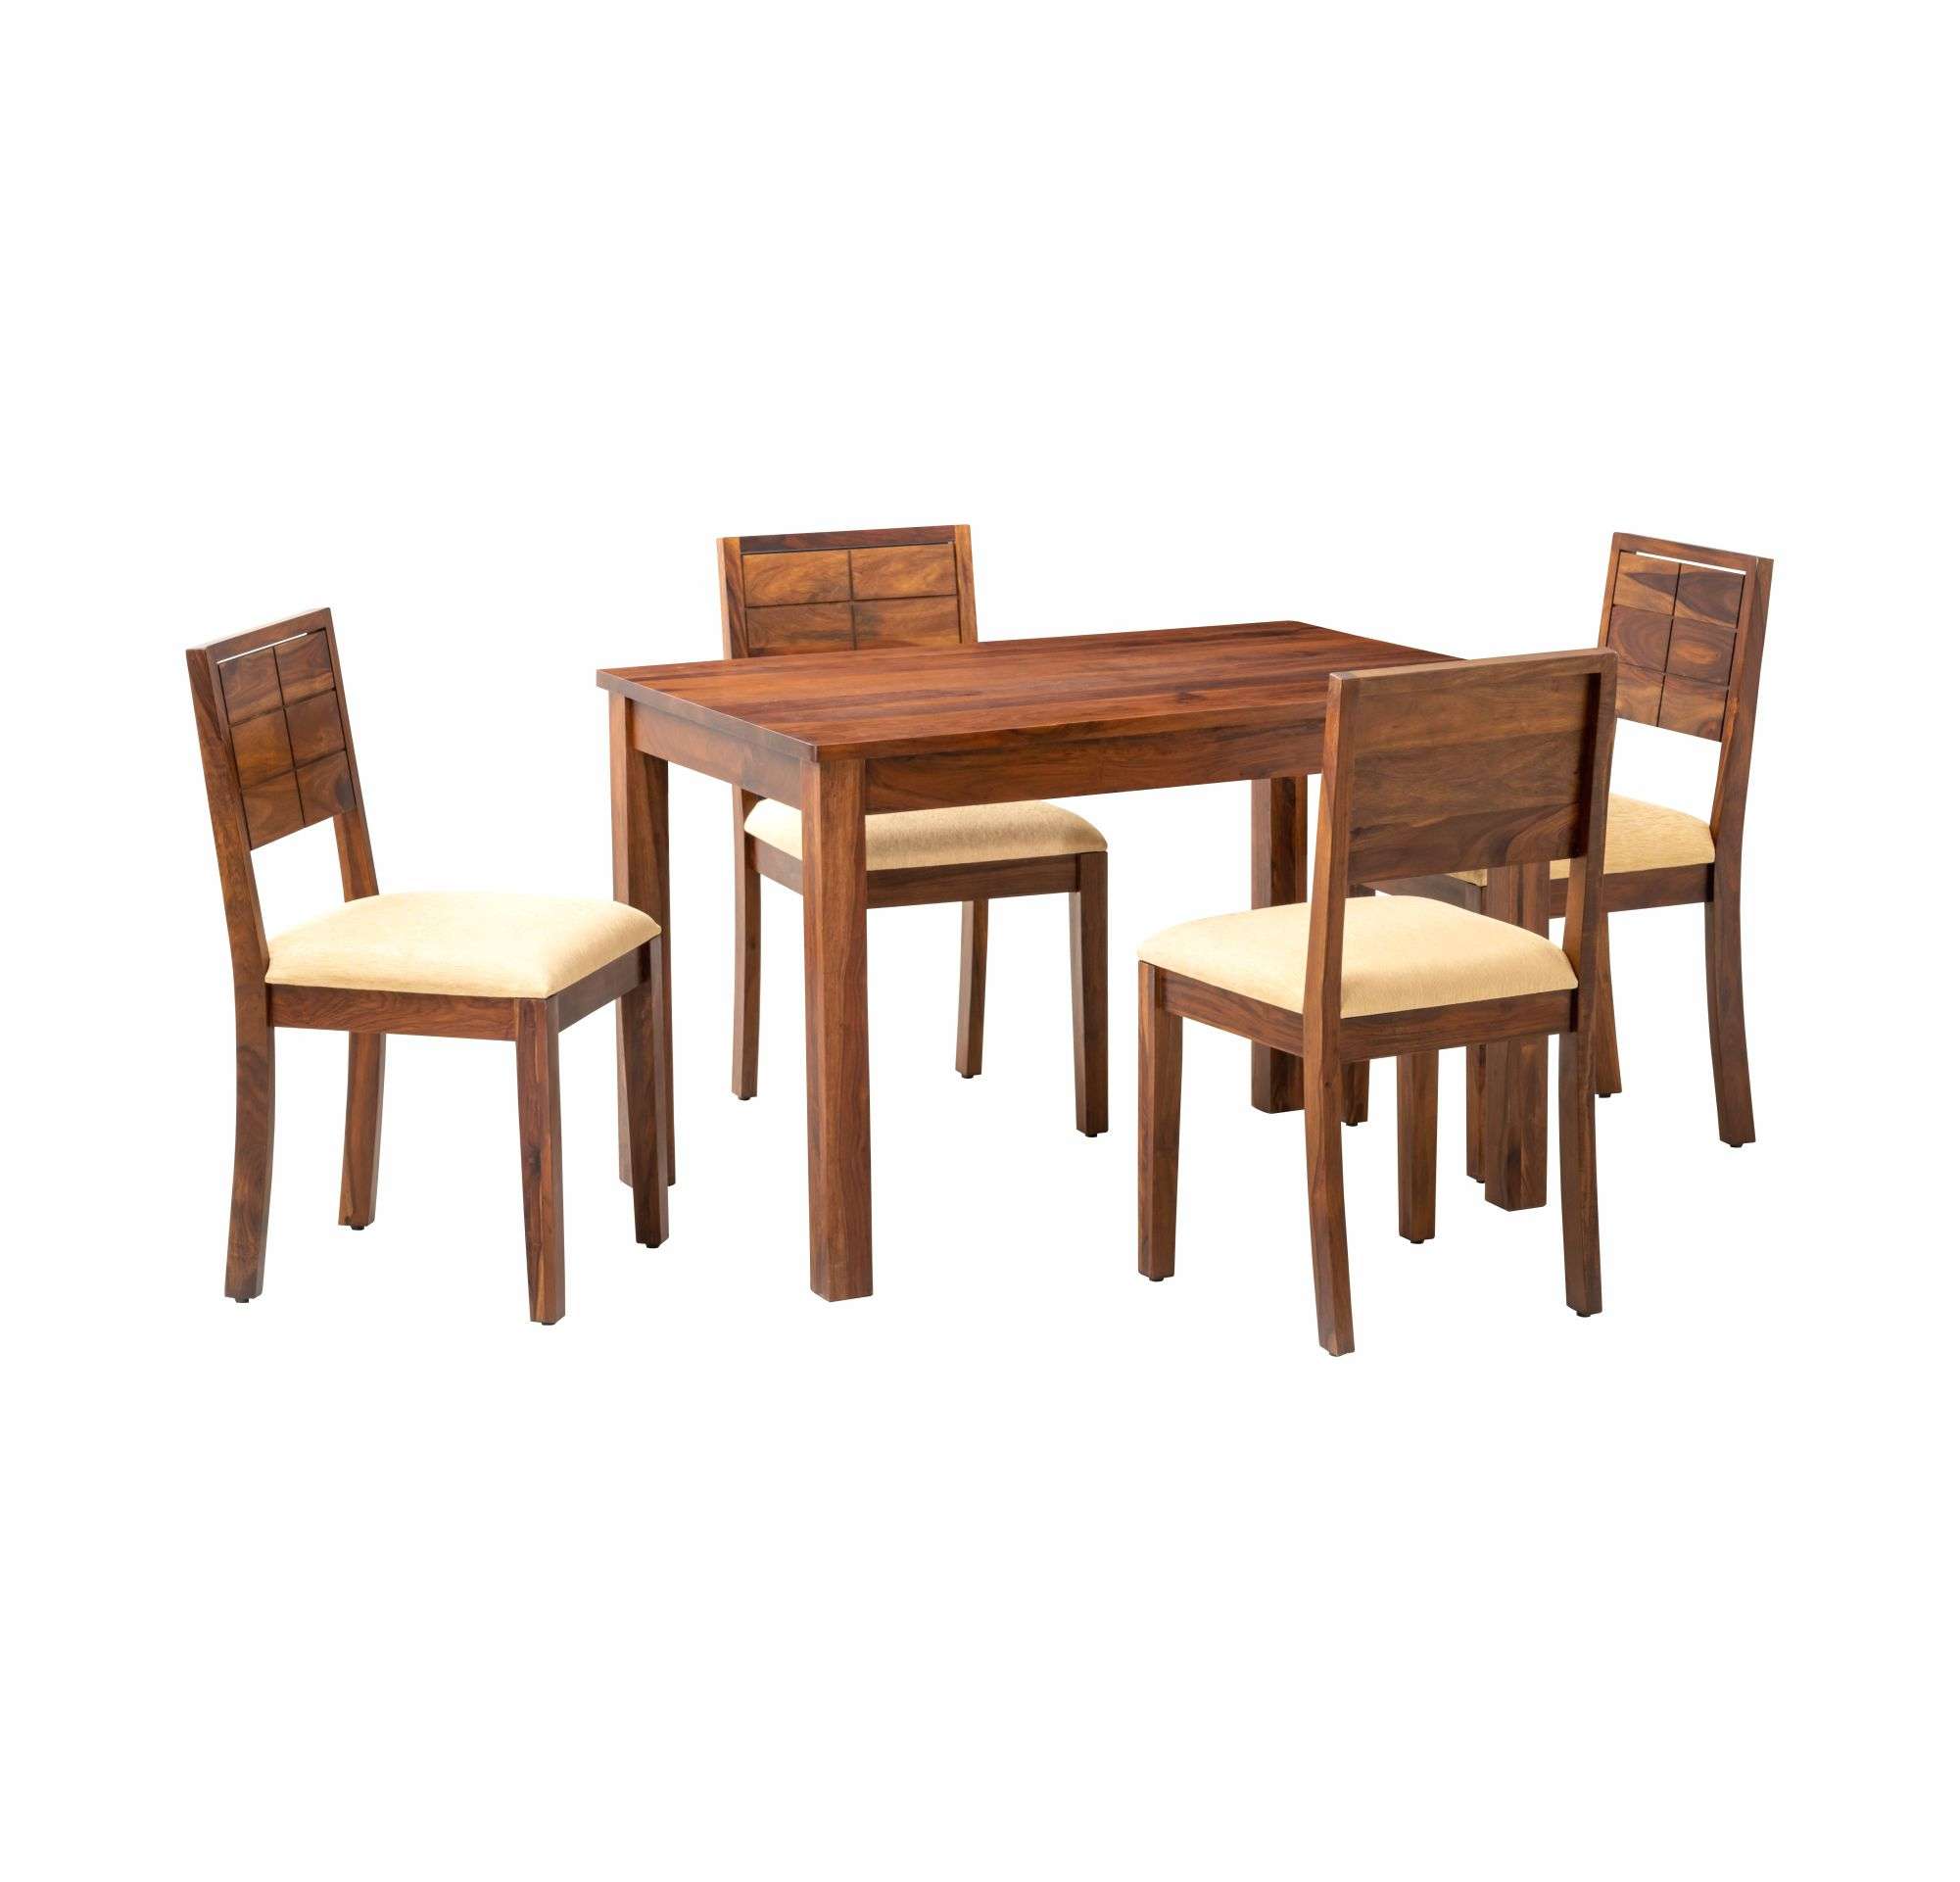 Eve 4 Seater Dining Set